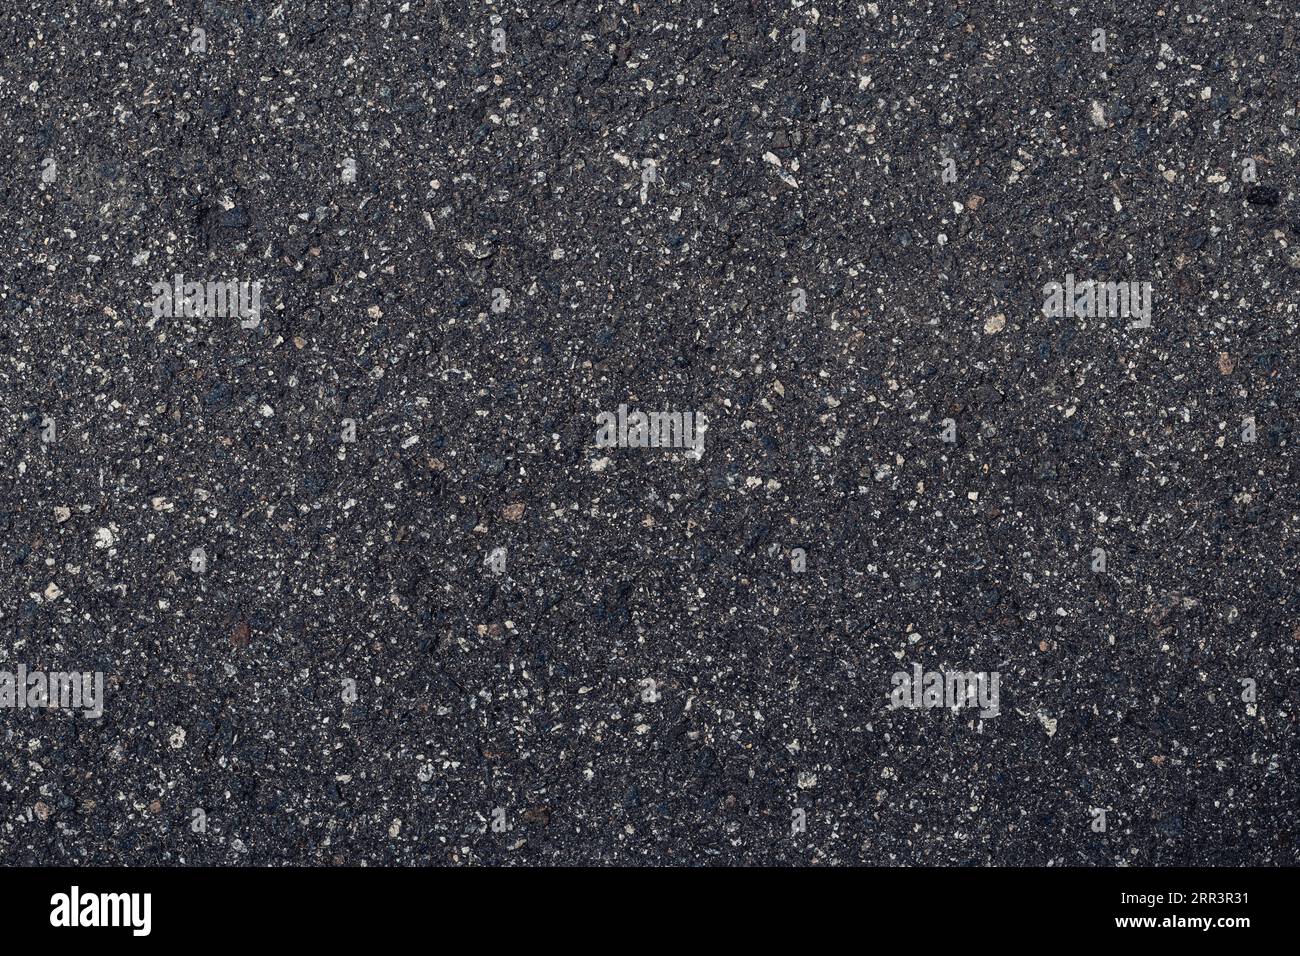 Surface grunge rough of asphalt, dark grainy road close-up, black texture background with small rocks, top view Stock Photo